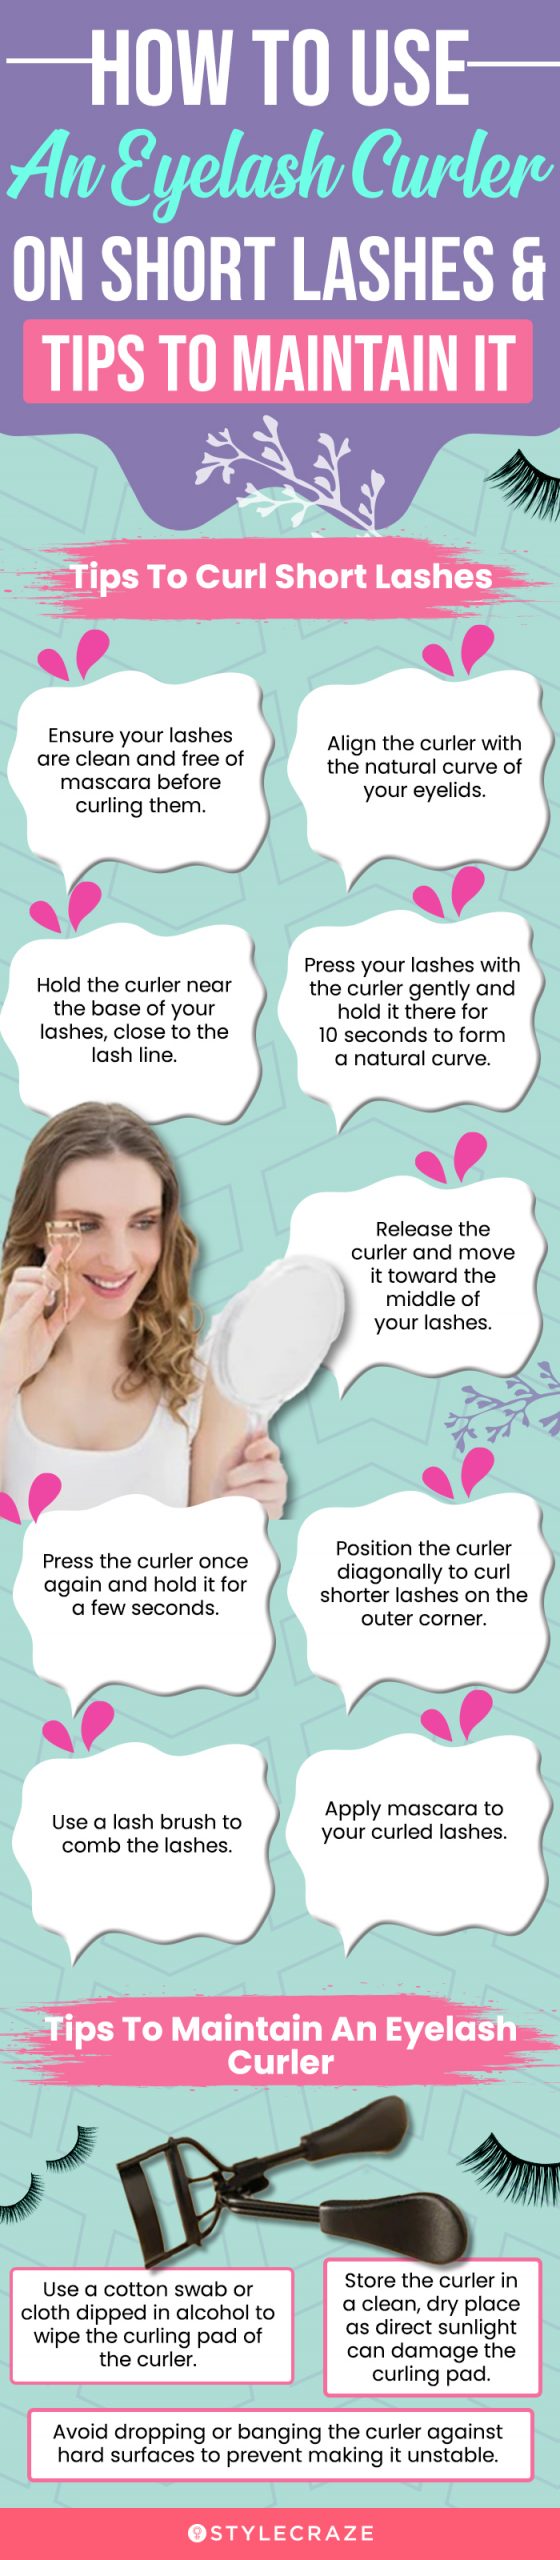 How To Use An Eyelash Curler On Short Lashes & Tips To Maintain It 